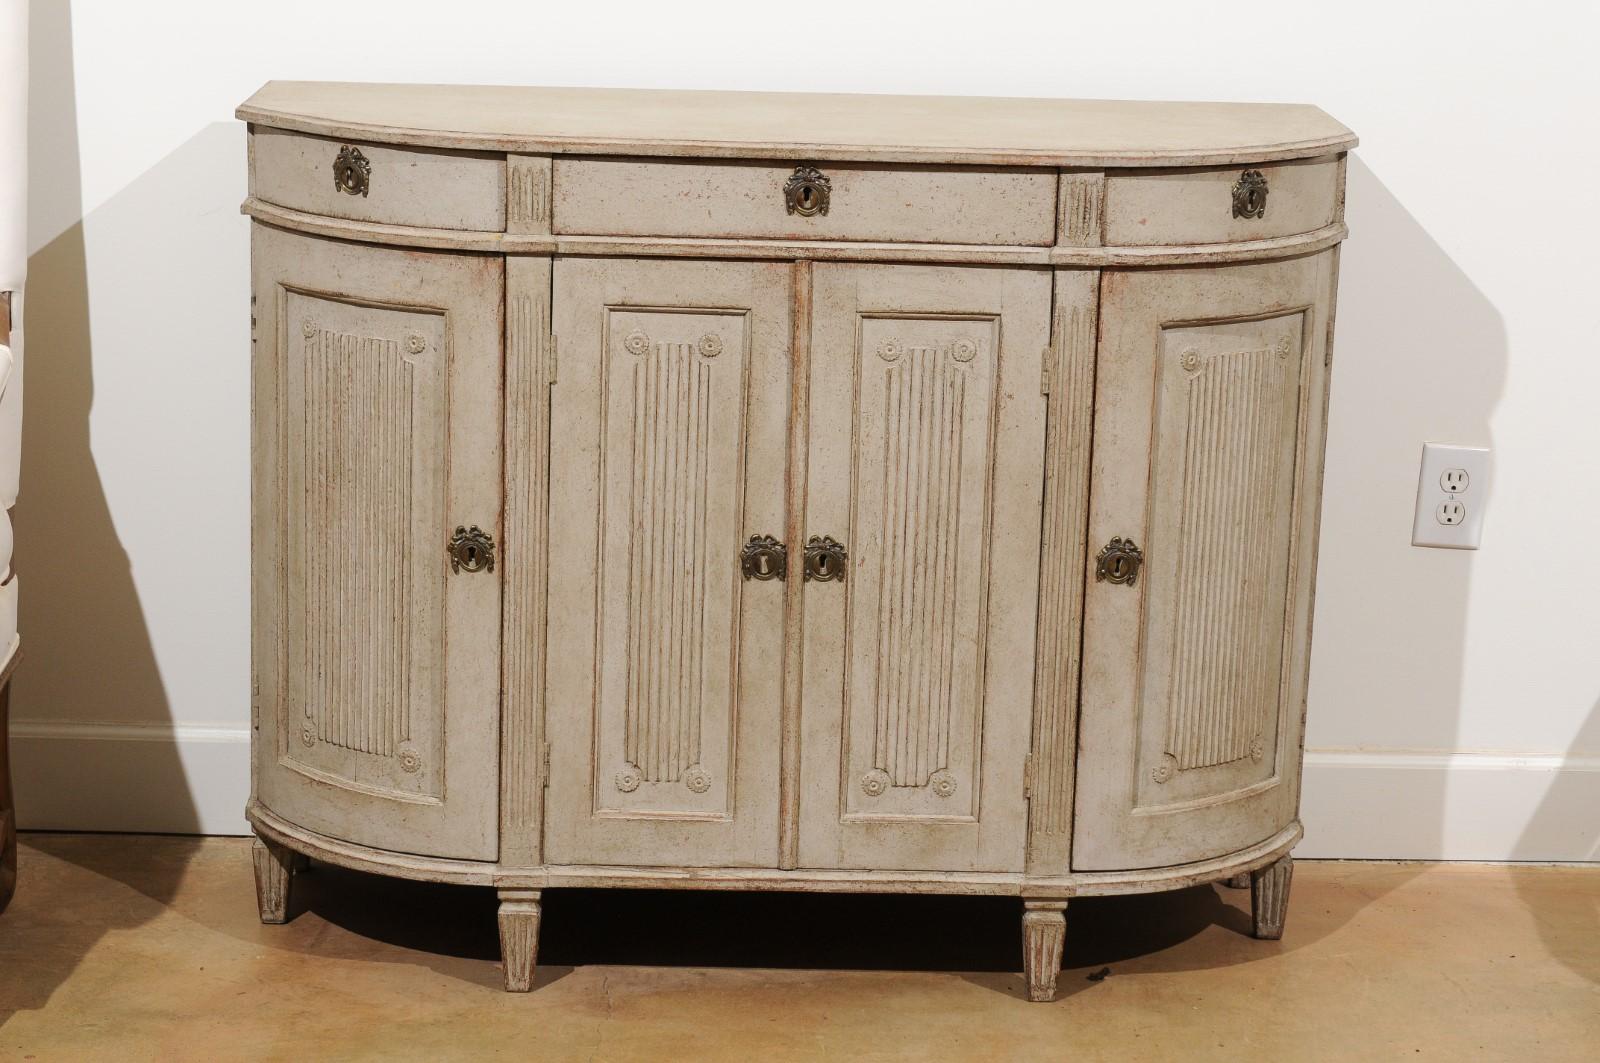 A Swedish Gustavian style painted demilune sideboard from the mid-19th century, with three drawers, four doors and reeded motifs. Born in Sweden in the mid-19th century, this exquisite painted demilune sideboard features a shaped planked top,